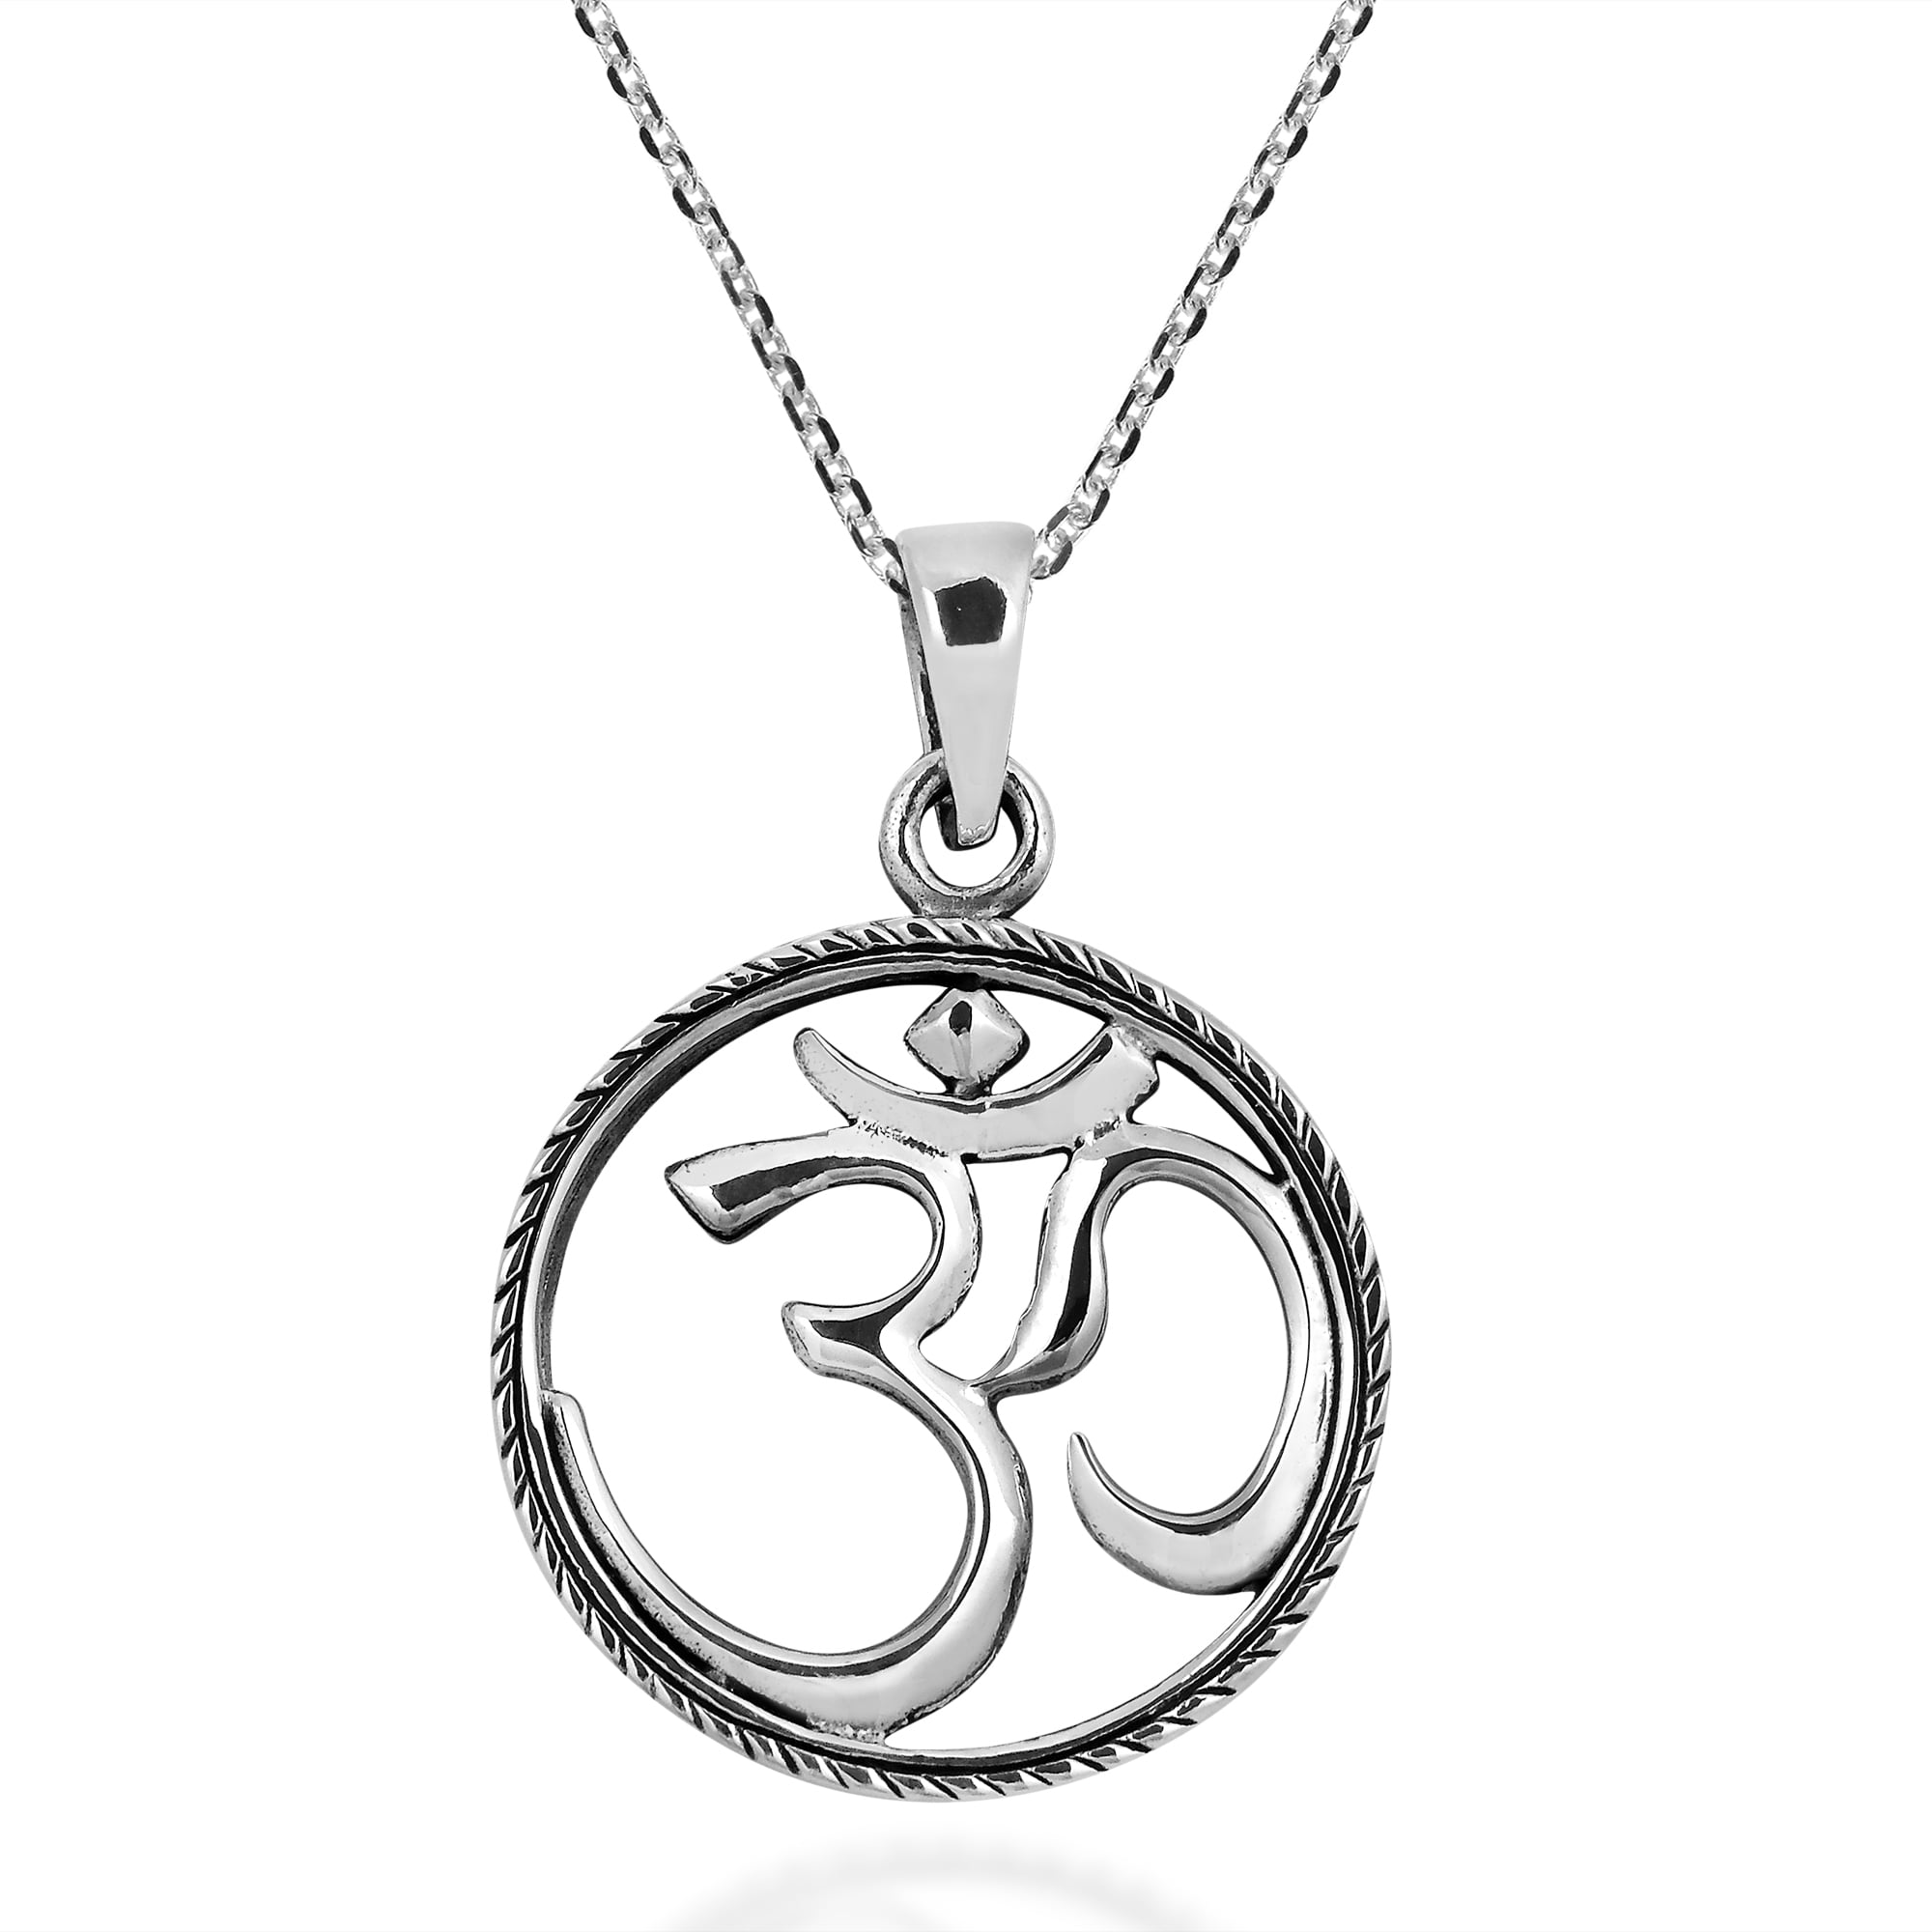 Sacred Om Ohm Aum Small Sterling Silver .925 Pendant Necklace 